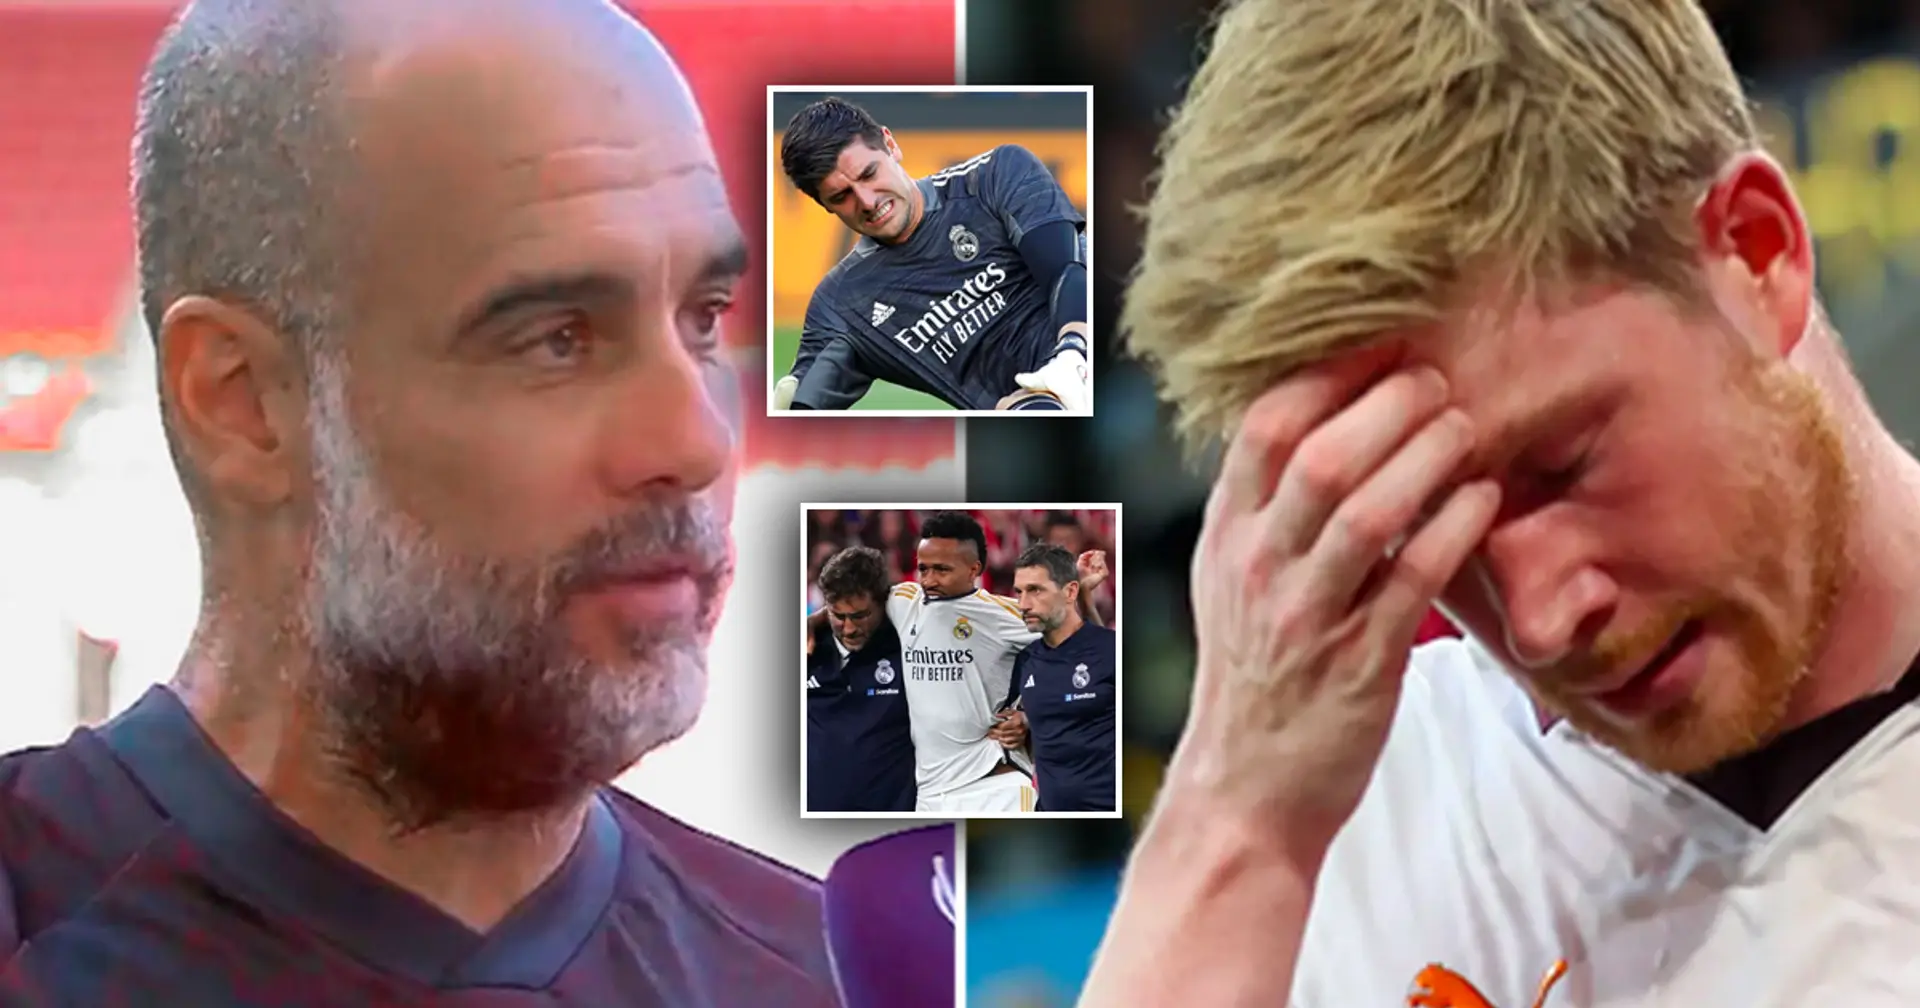 'They make you go to Asia, to the US': Guardiola mentions Militao and Courtois in emotional rant